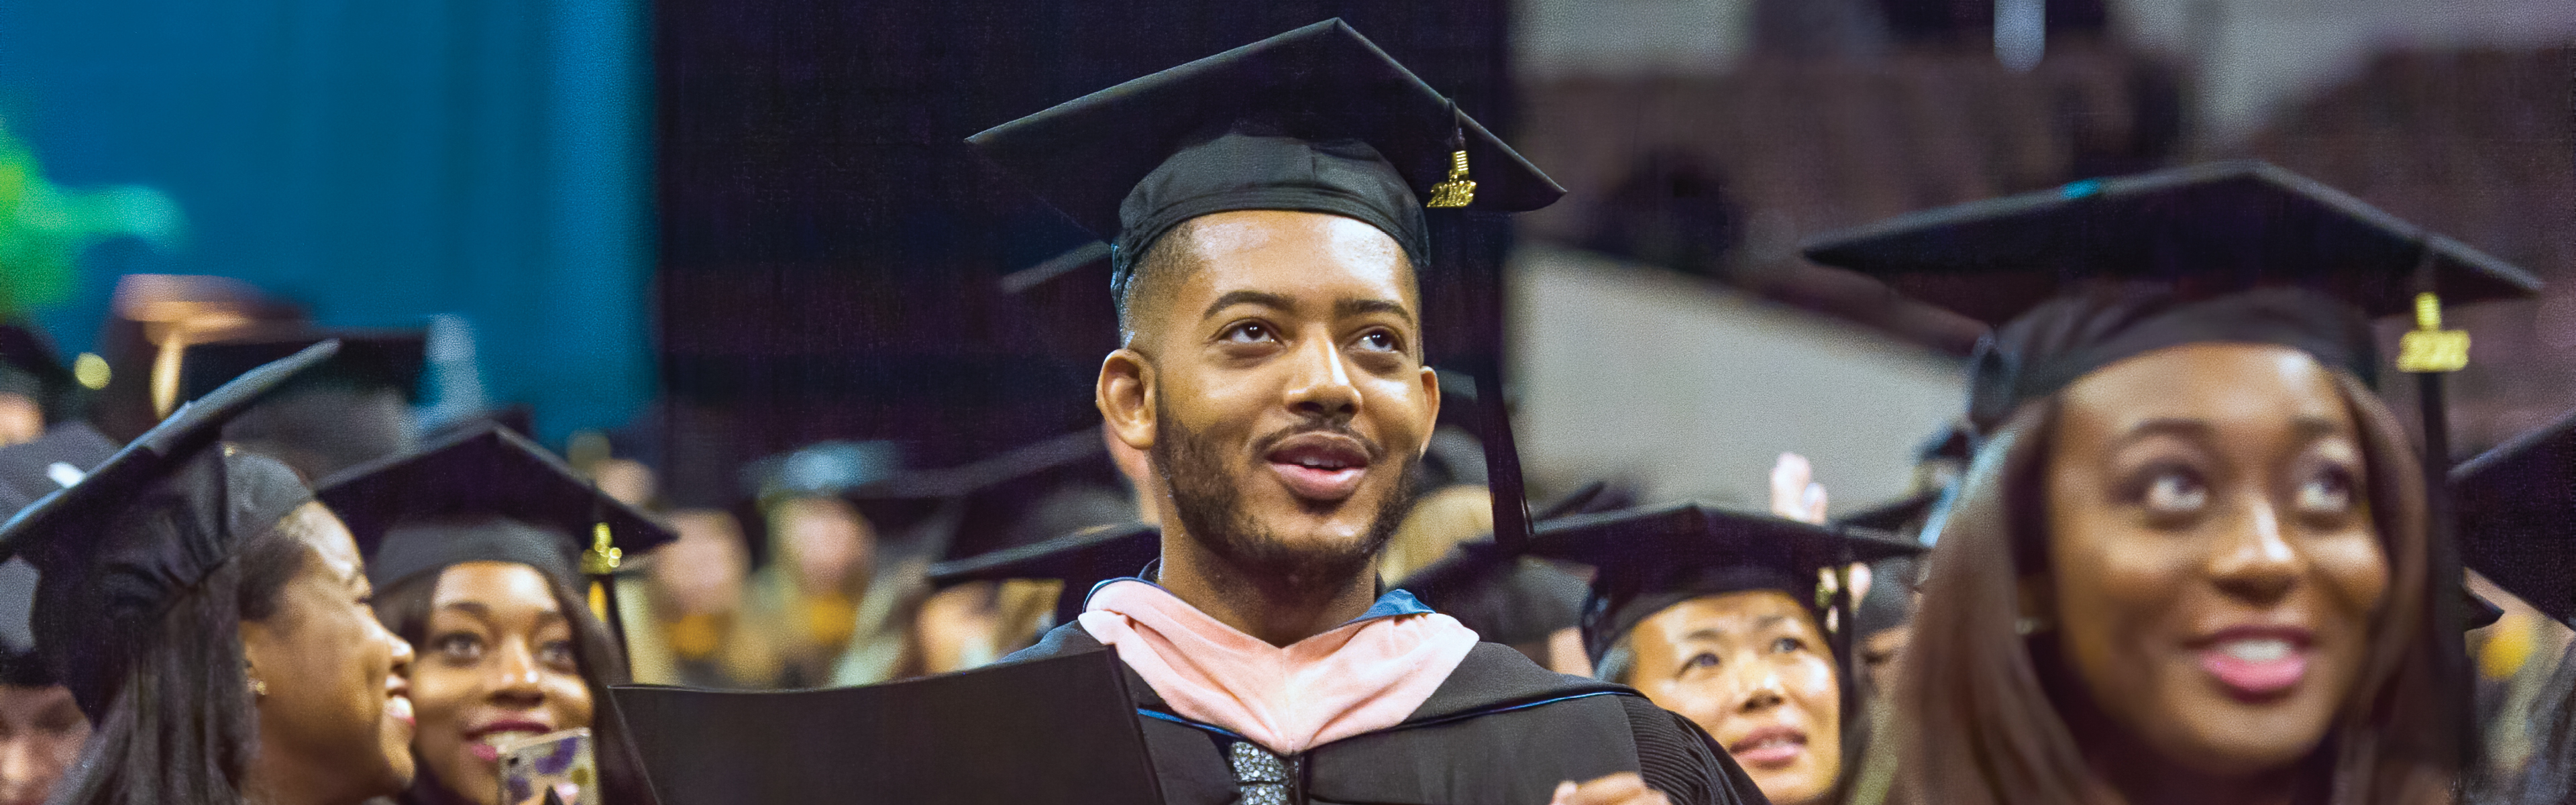 A group of diverse students at an EVMS Commencement ceremony. The figure in focus is a Black male graduate in cap and gown with a hopeful expression.